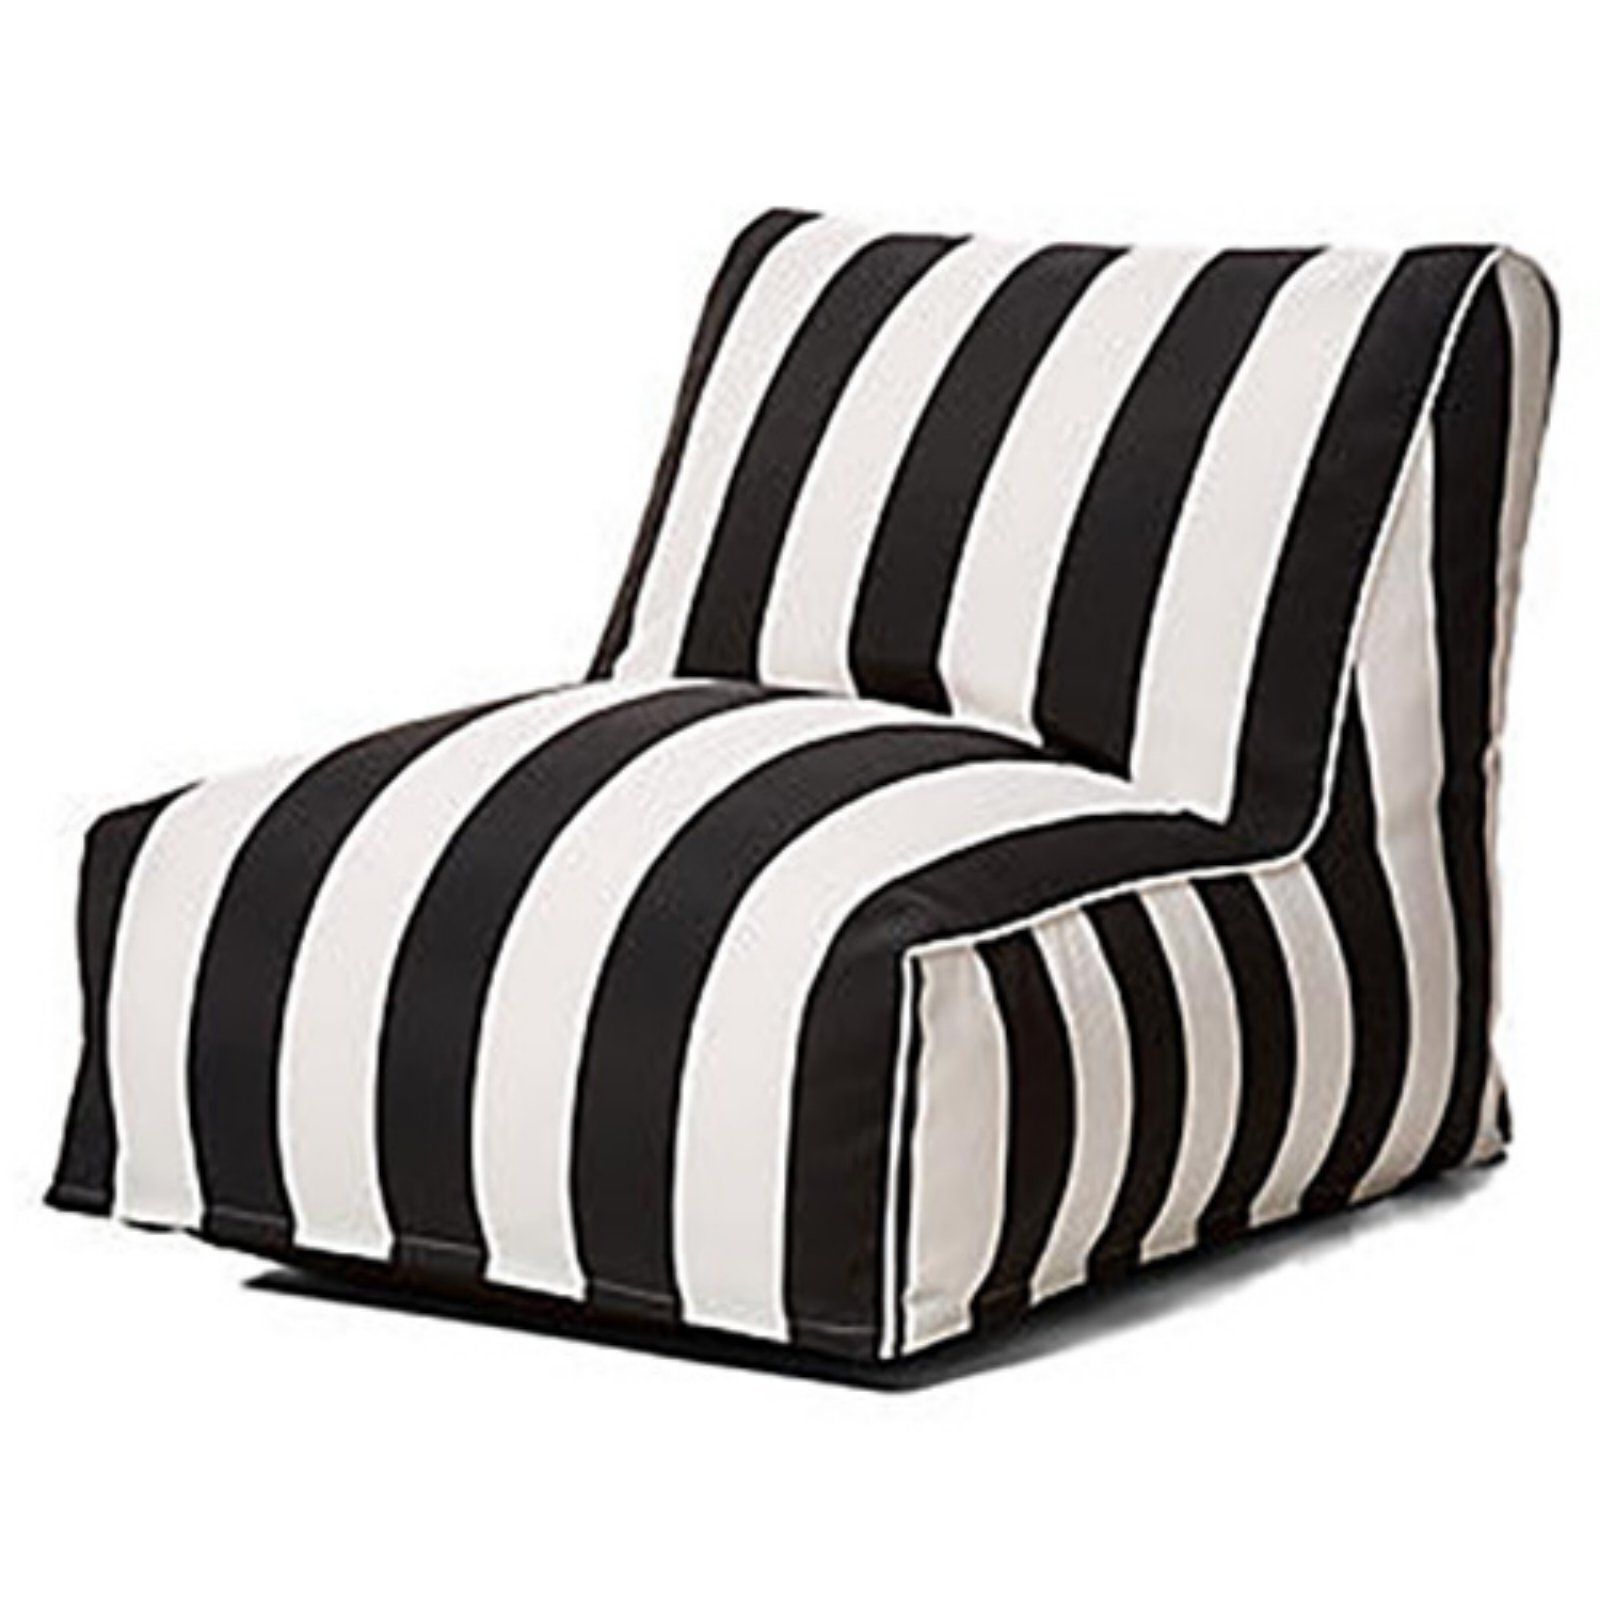 Fashionable Hrh Designs Indoor/ Outdoor Bean Bag Lounge Chair Burgandy Intended For Indoor/outdoor Vertical Stripe Bean Bag Chair Loungers (View 12 of 25)